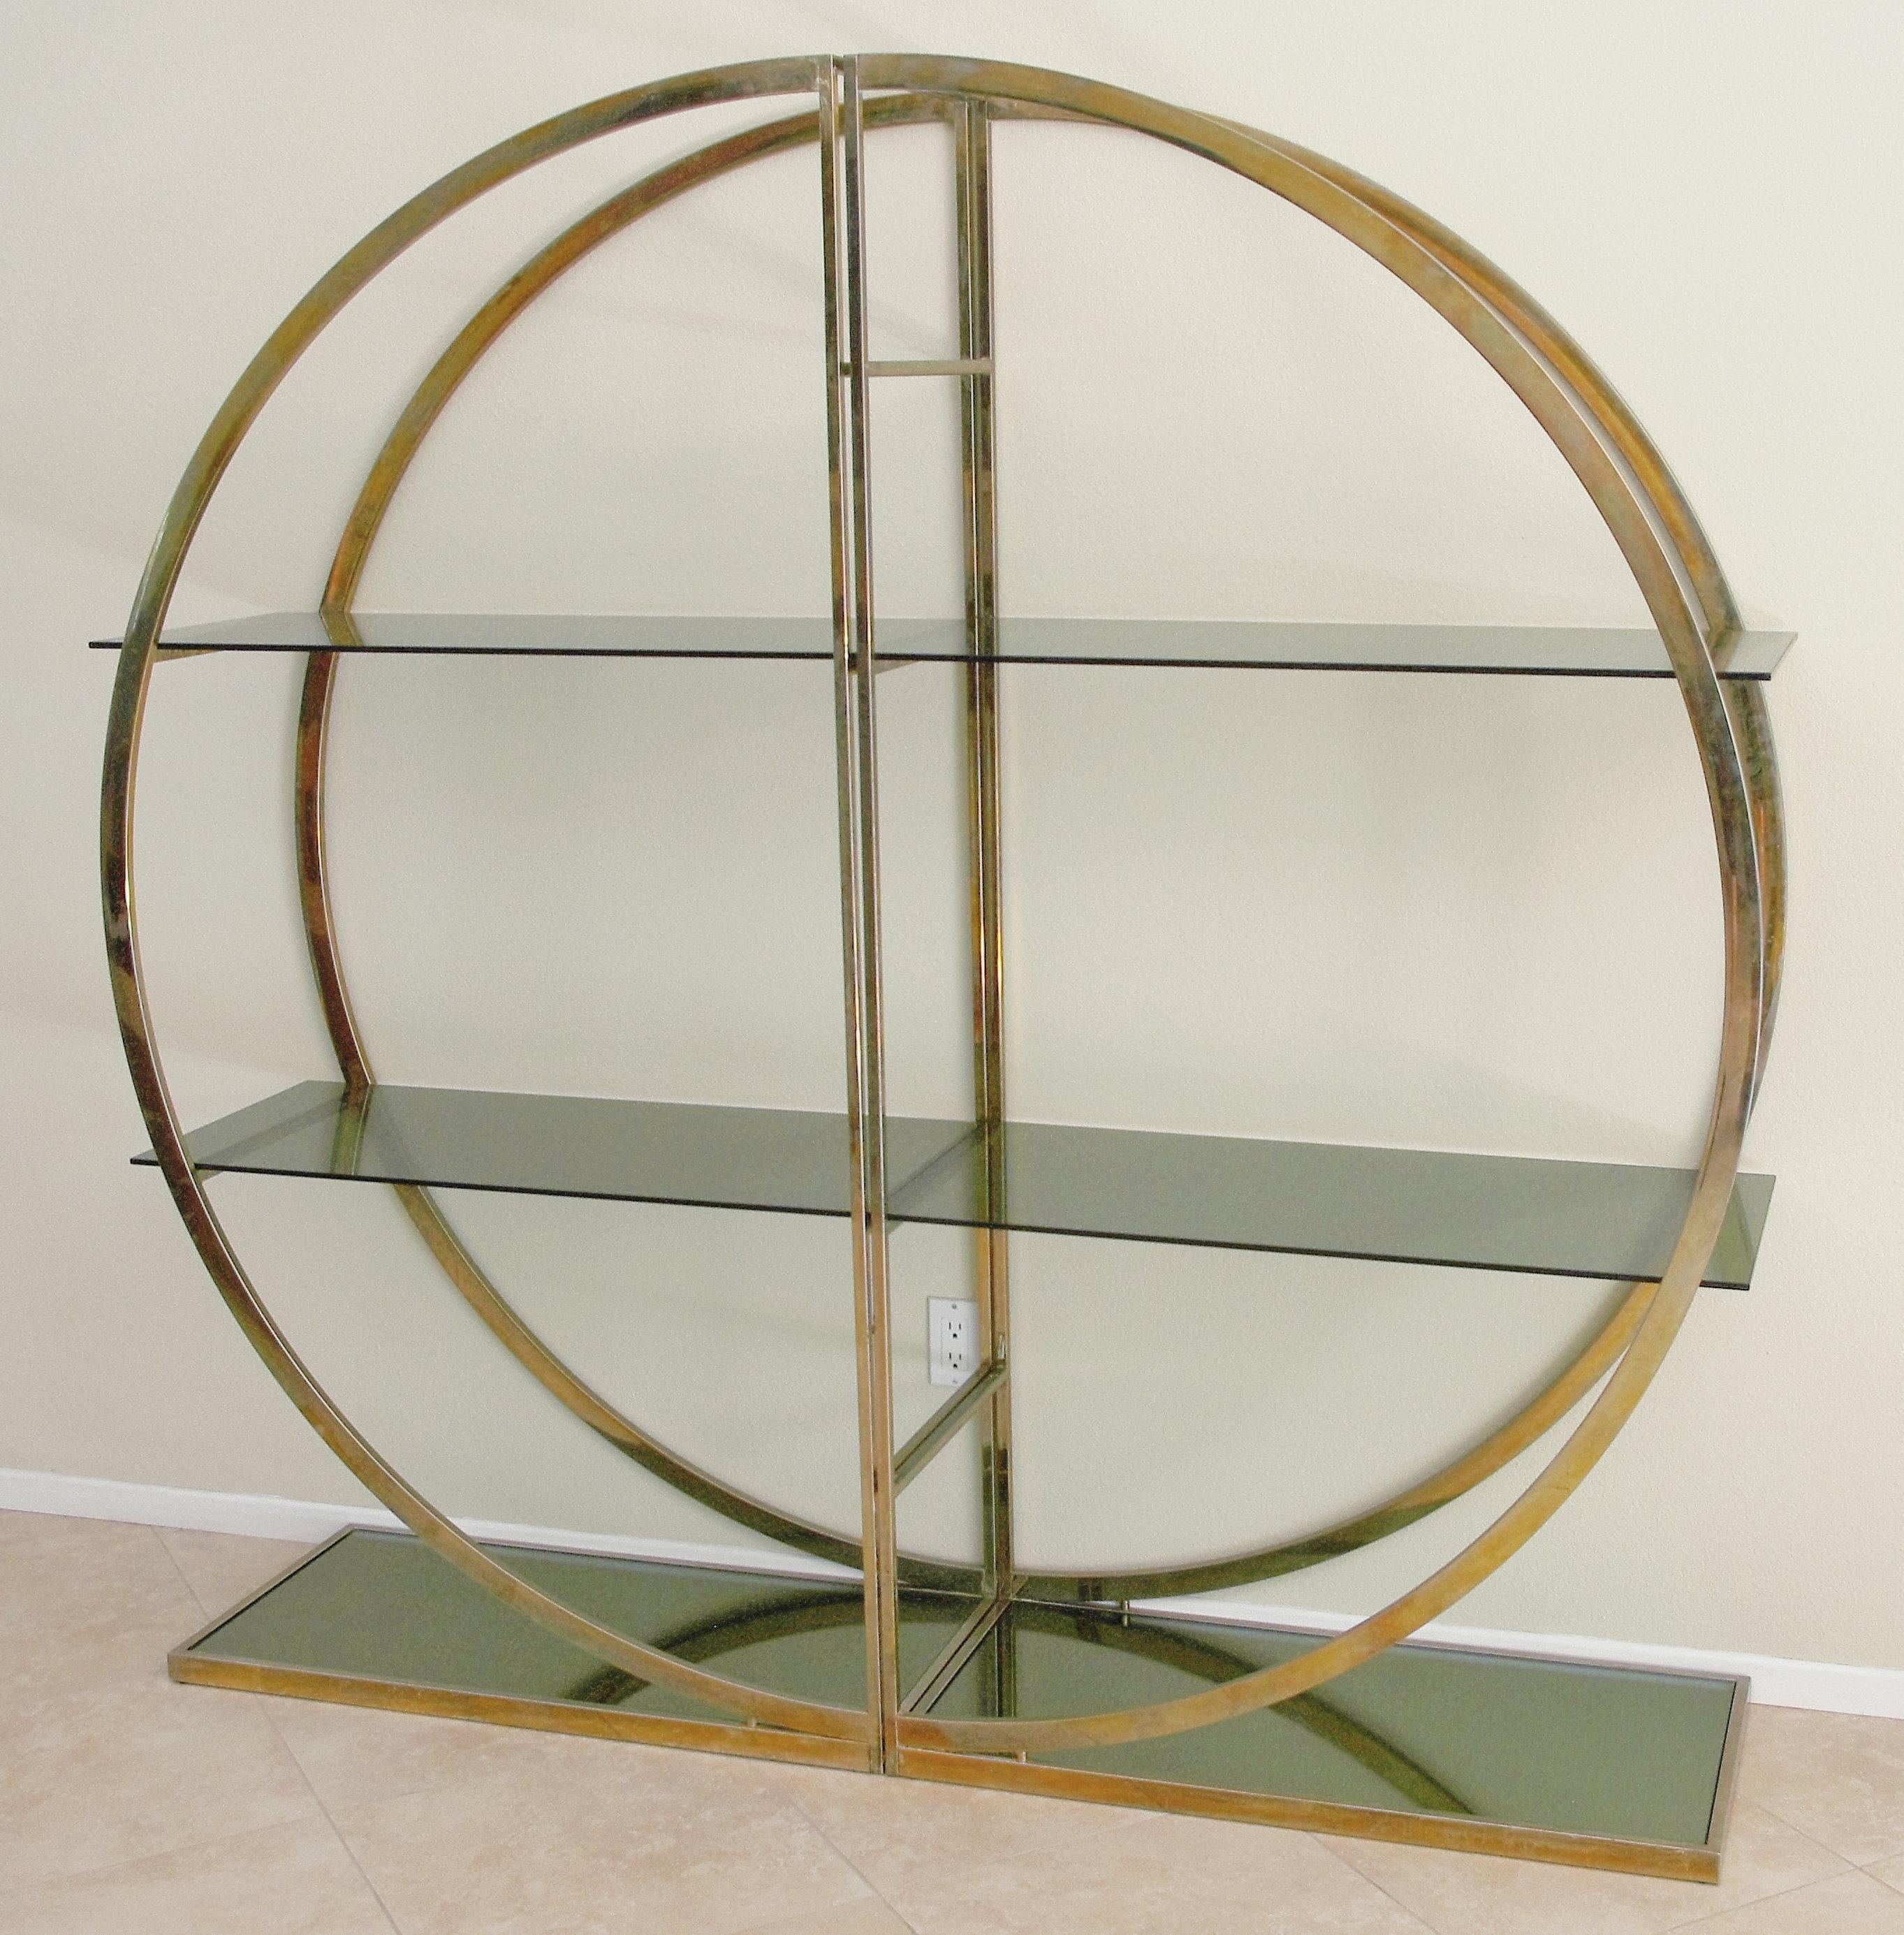 Vintage two-piece étagère by Milo Baughman, in brass finish with original smoky bevelled glass shelves.

When closed, it measures: width 72 inches, height 72 inches, depth 17 inches.